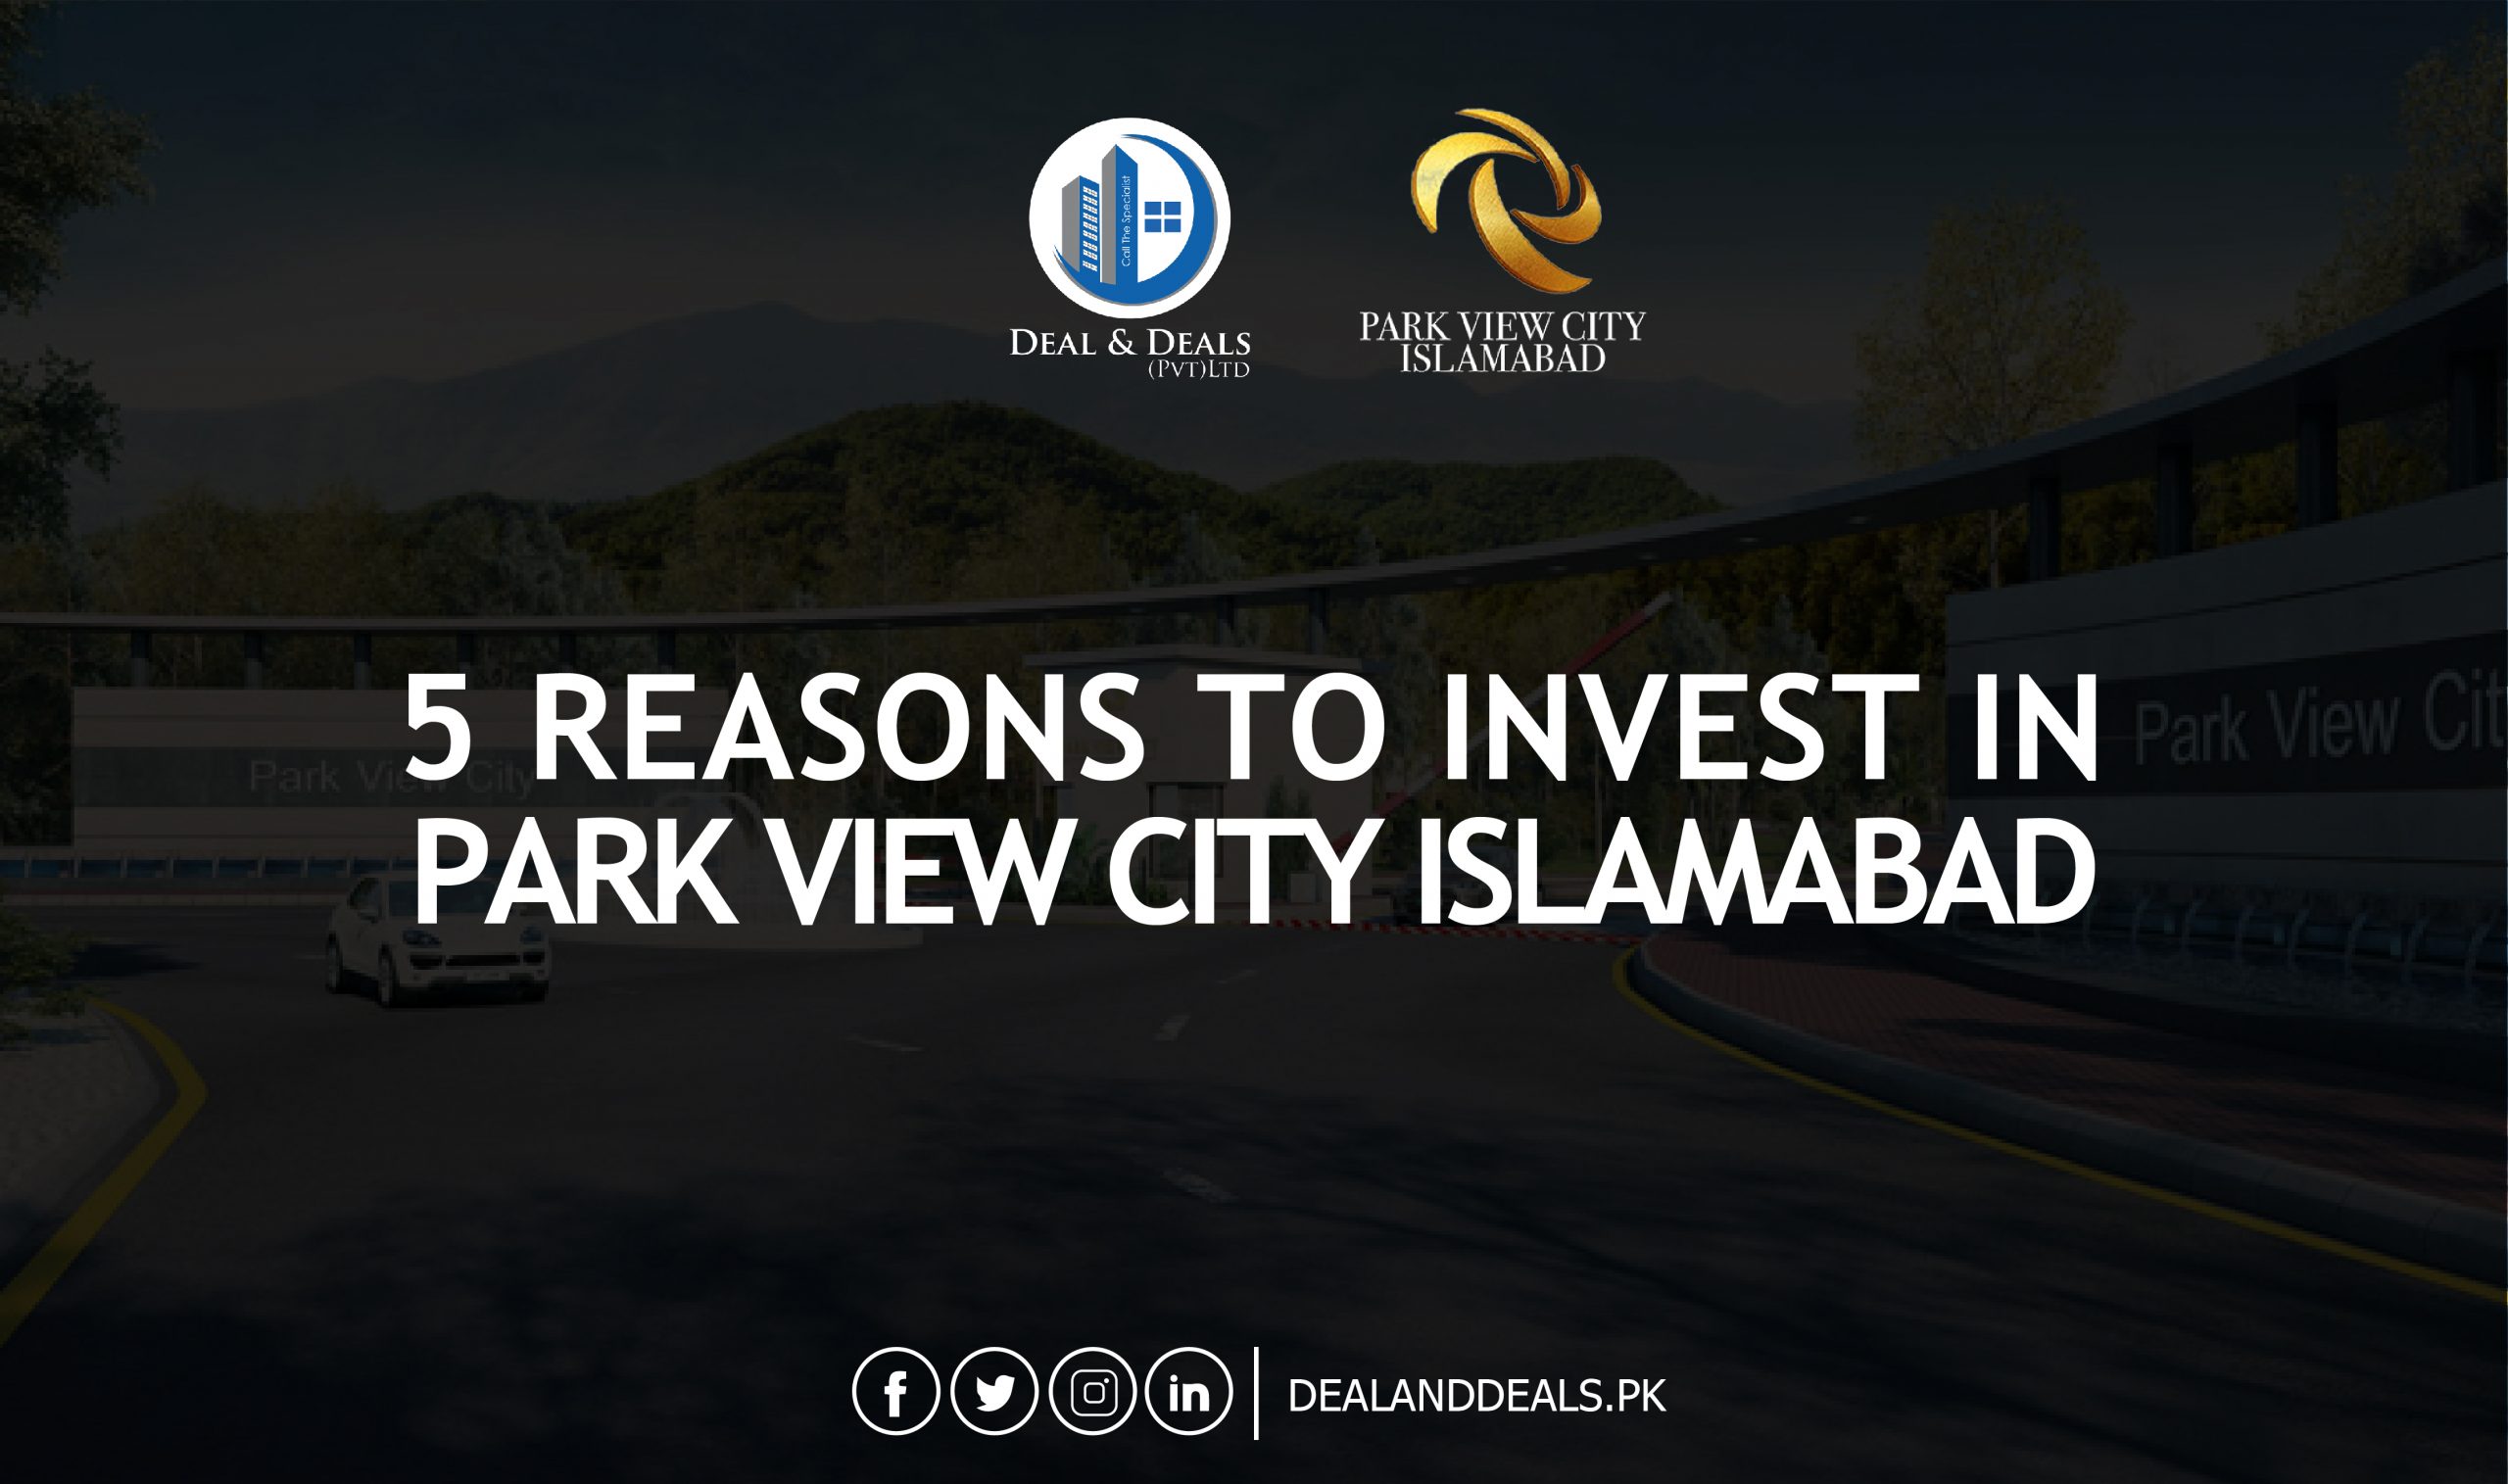 Park-View-City-Islamabad-Investment-Reasons